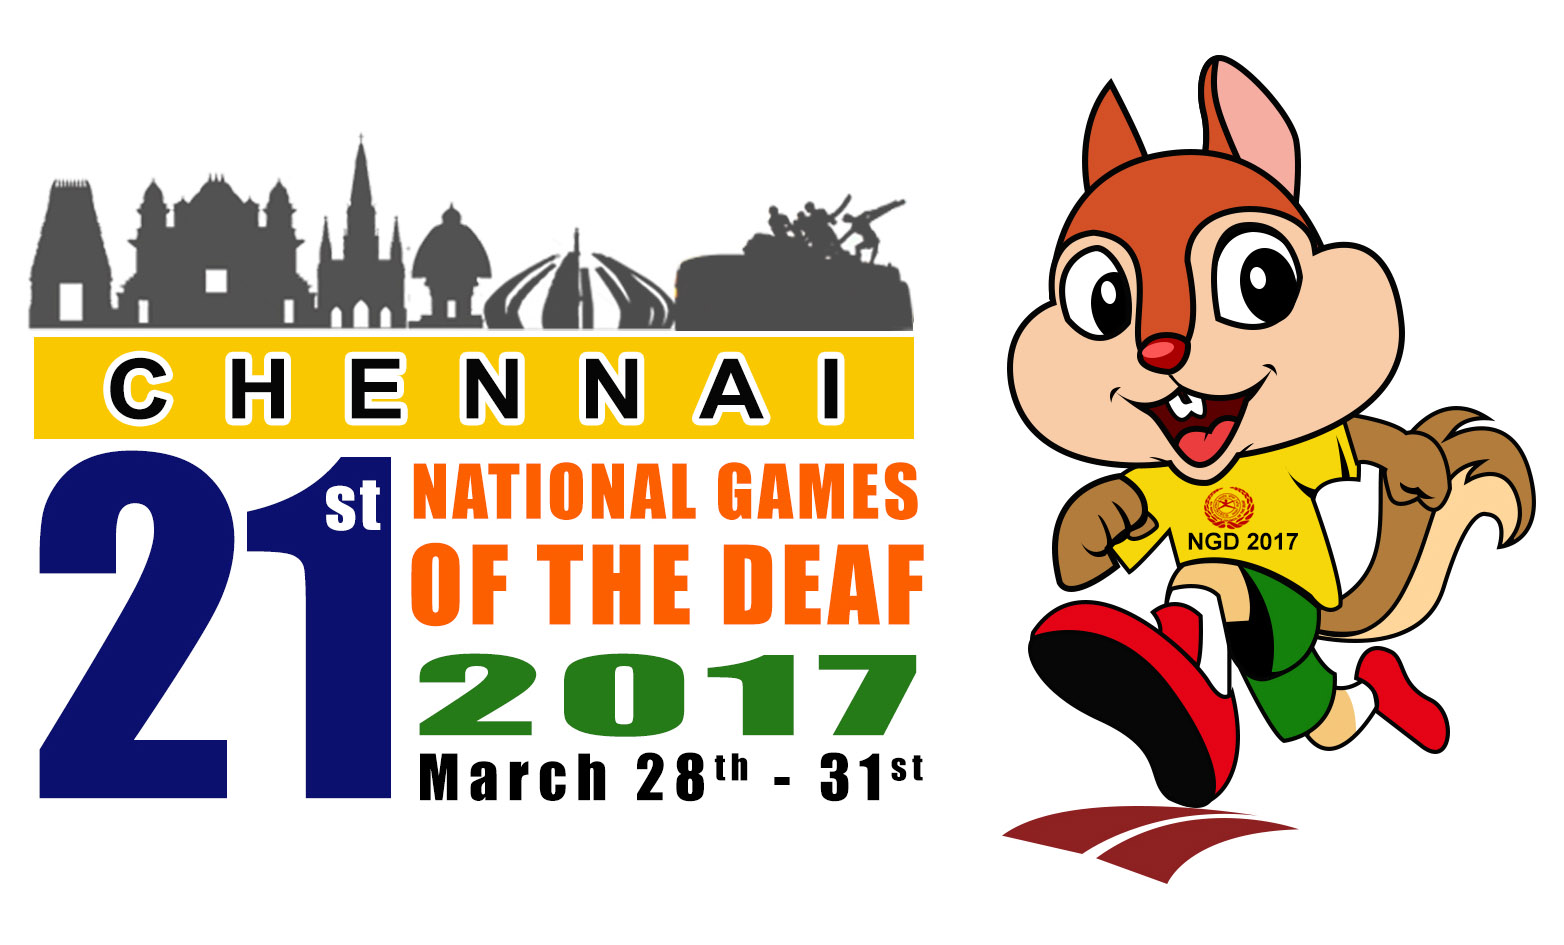 21st National Games of the deaf, Chennai